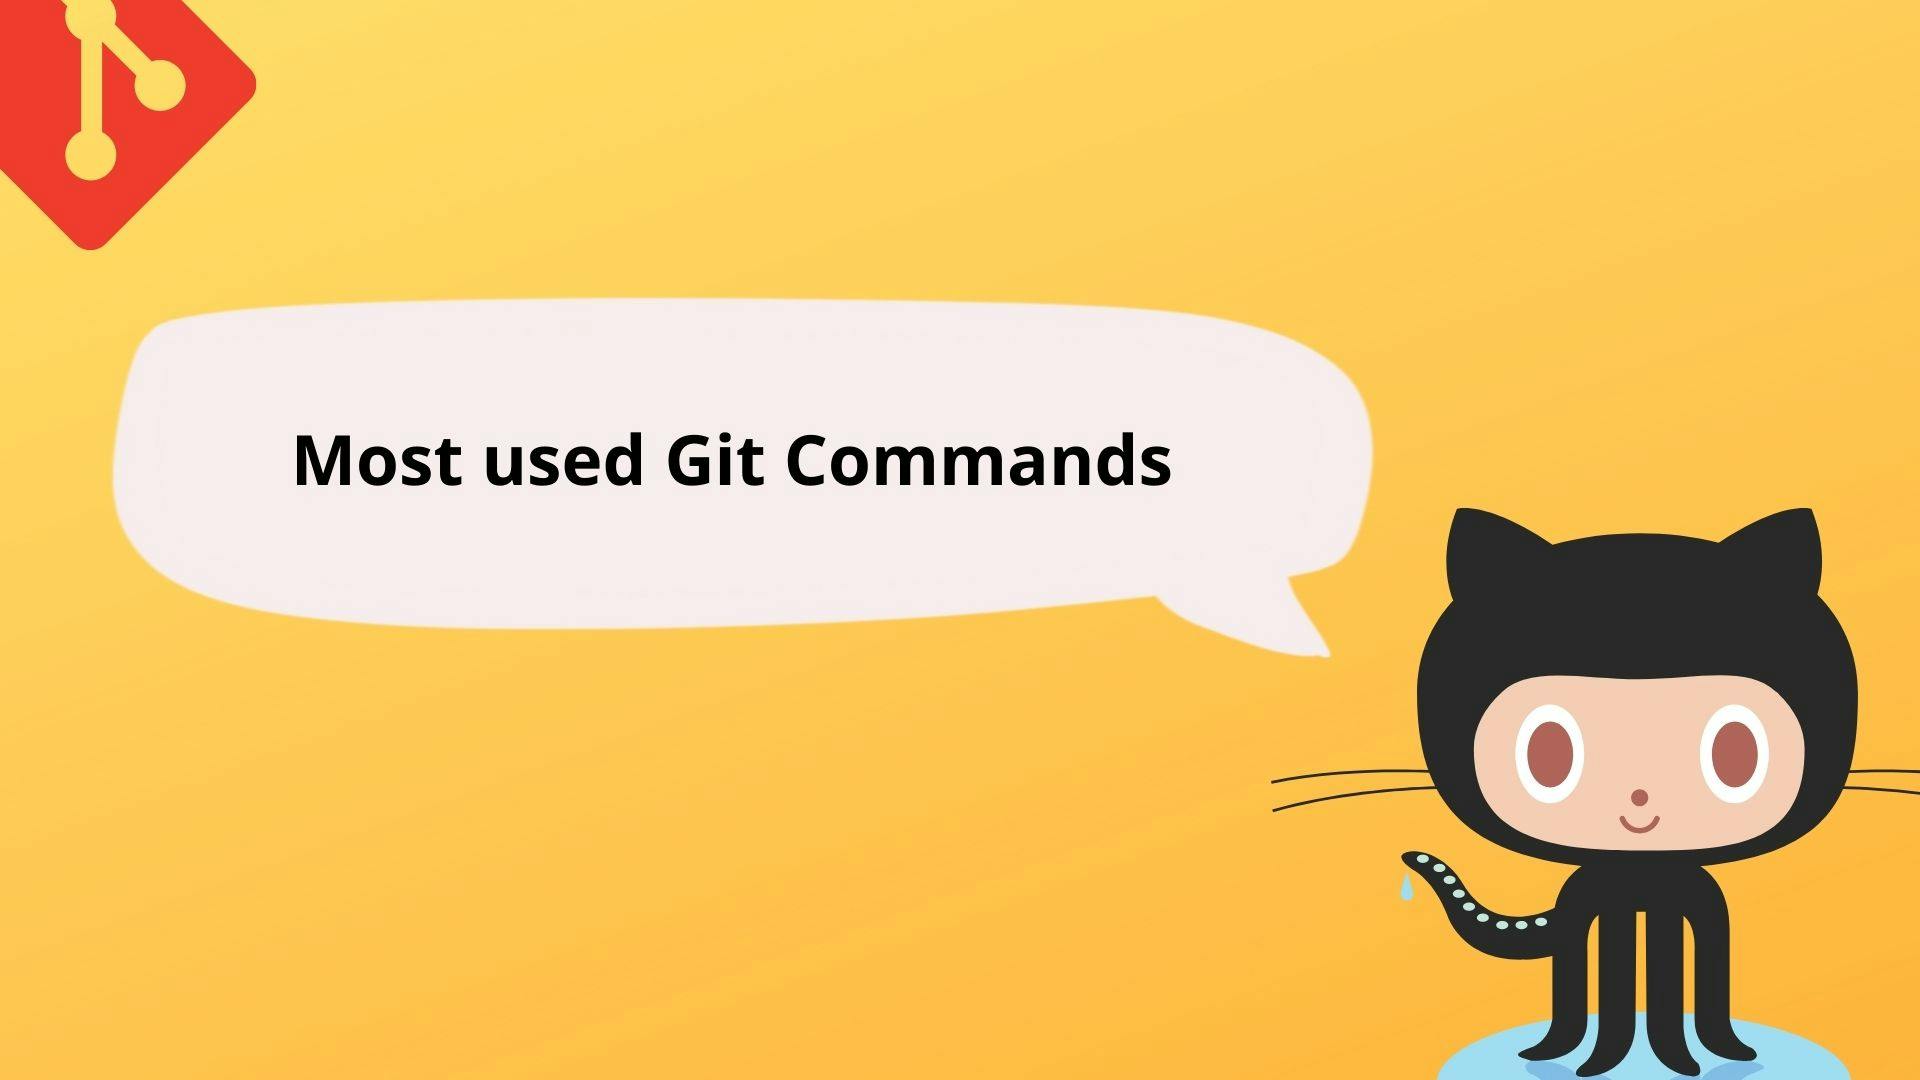 Most used Git commands for collaboration